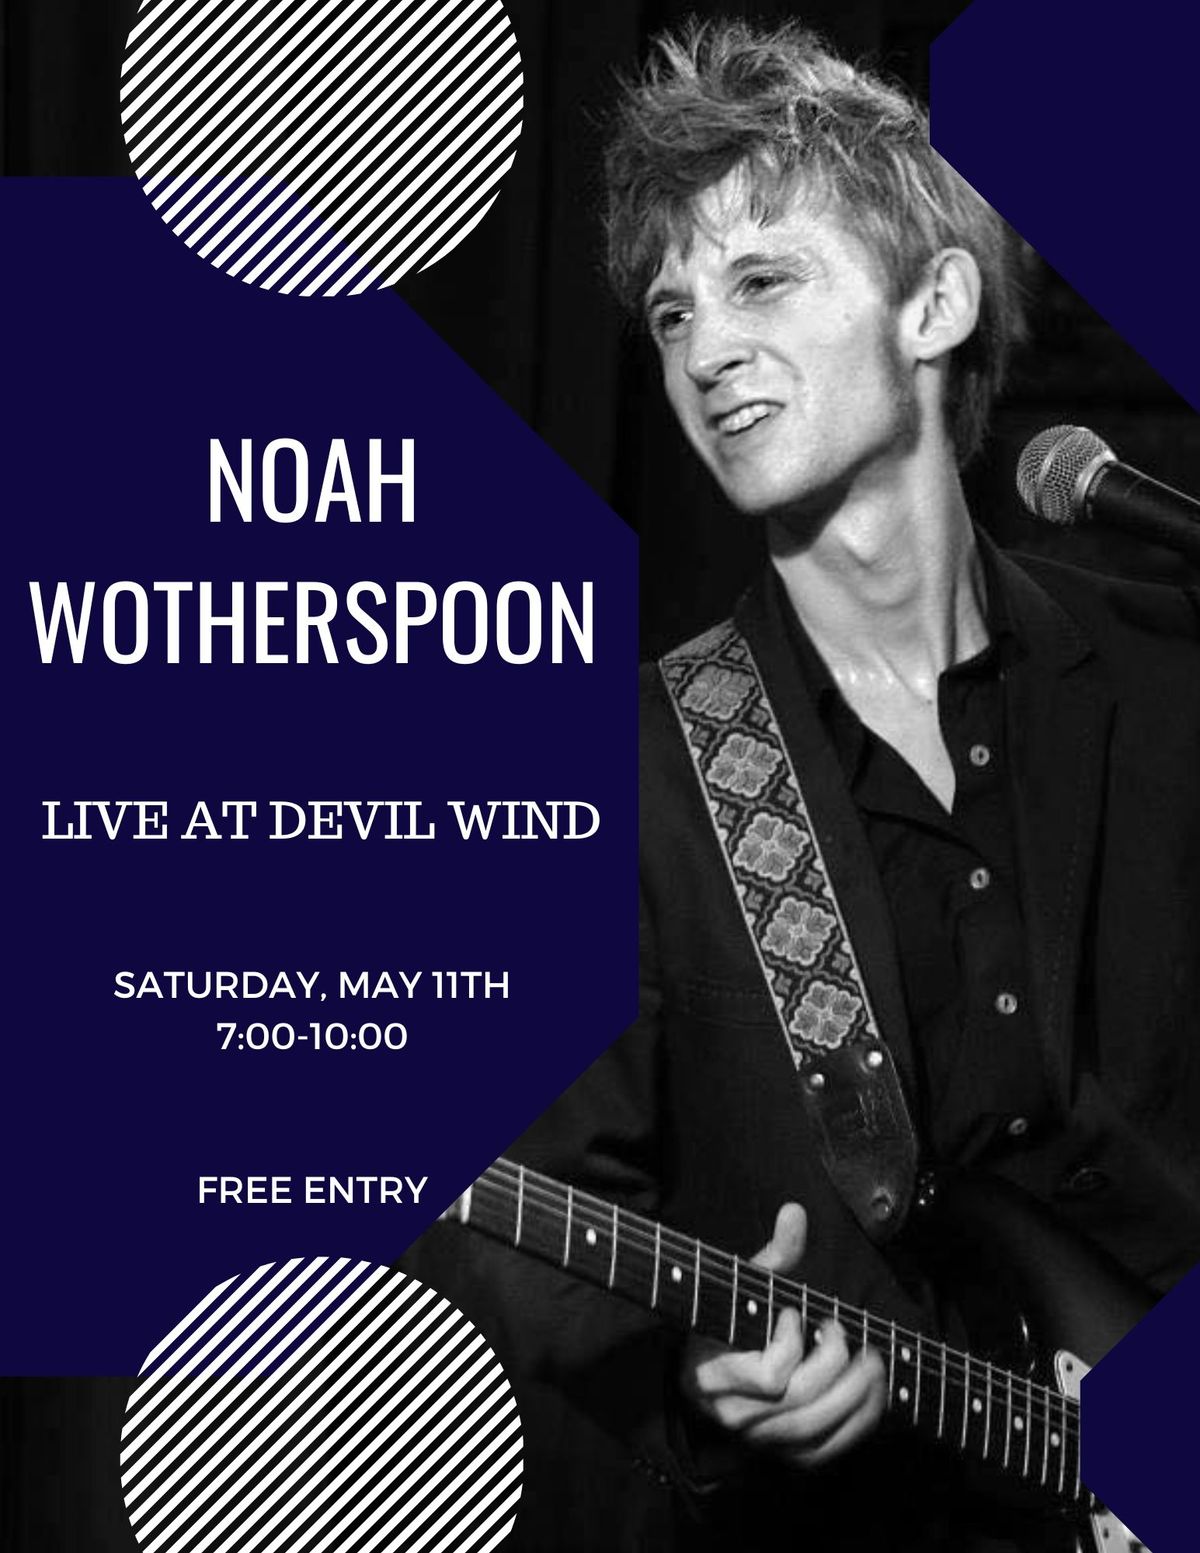 Noah Wotherspoon Live at Devil Wind 